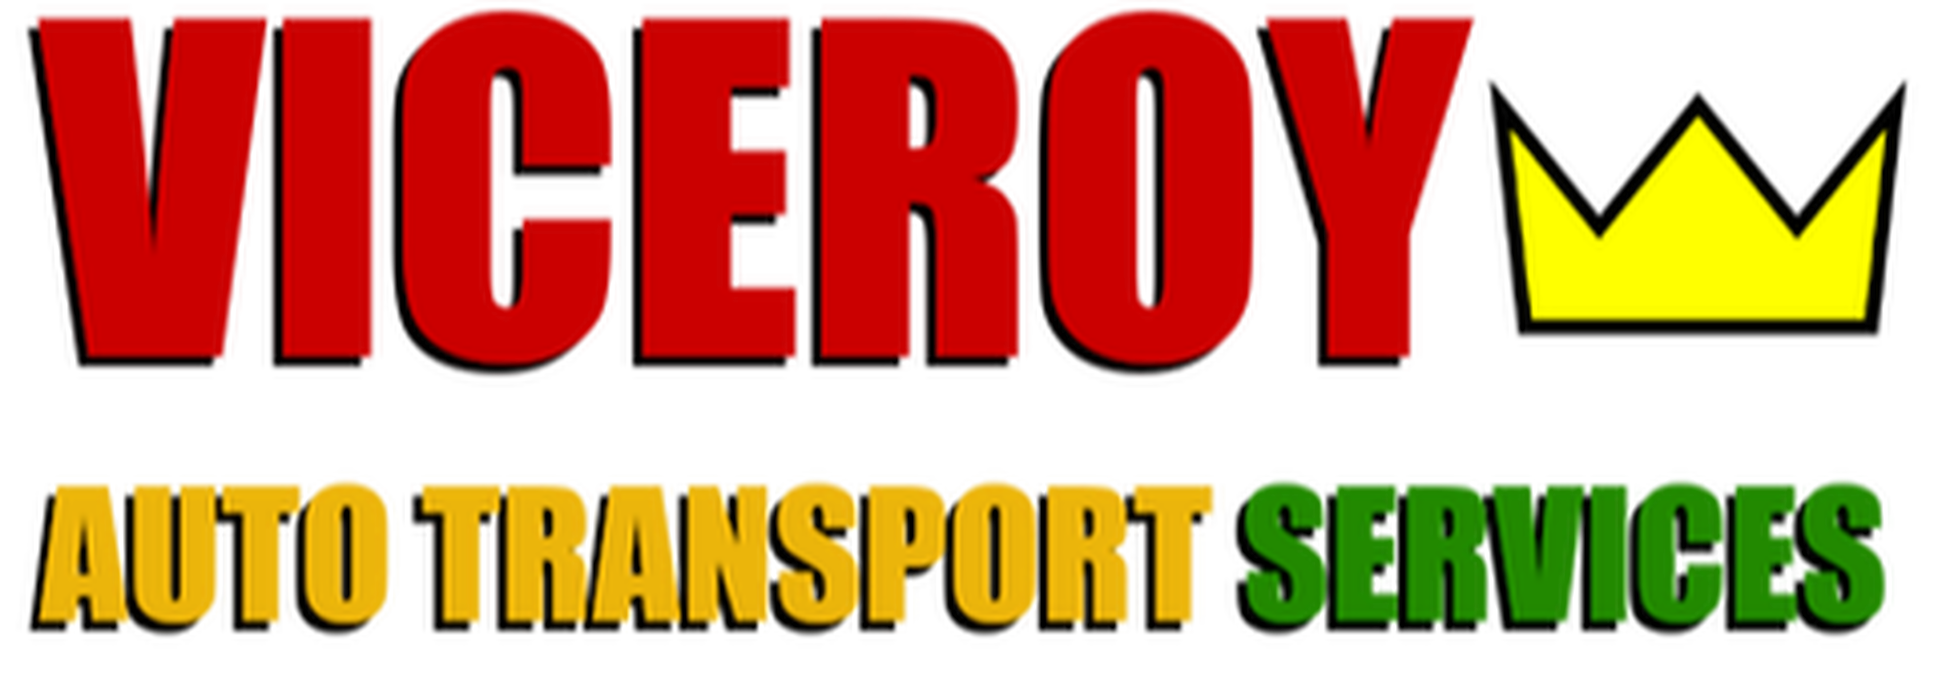 Viceroy Auto Trans is a highly rated company 